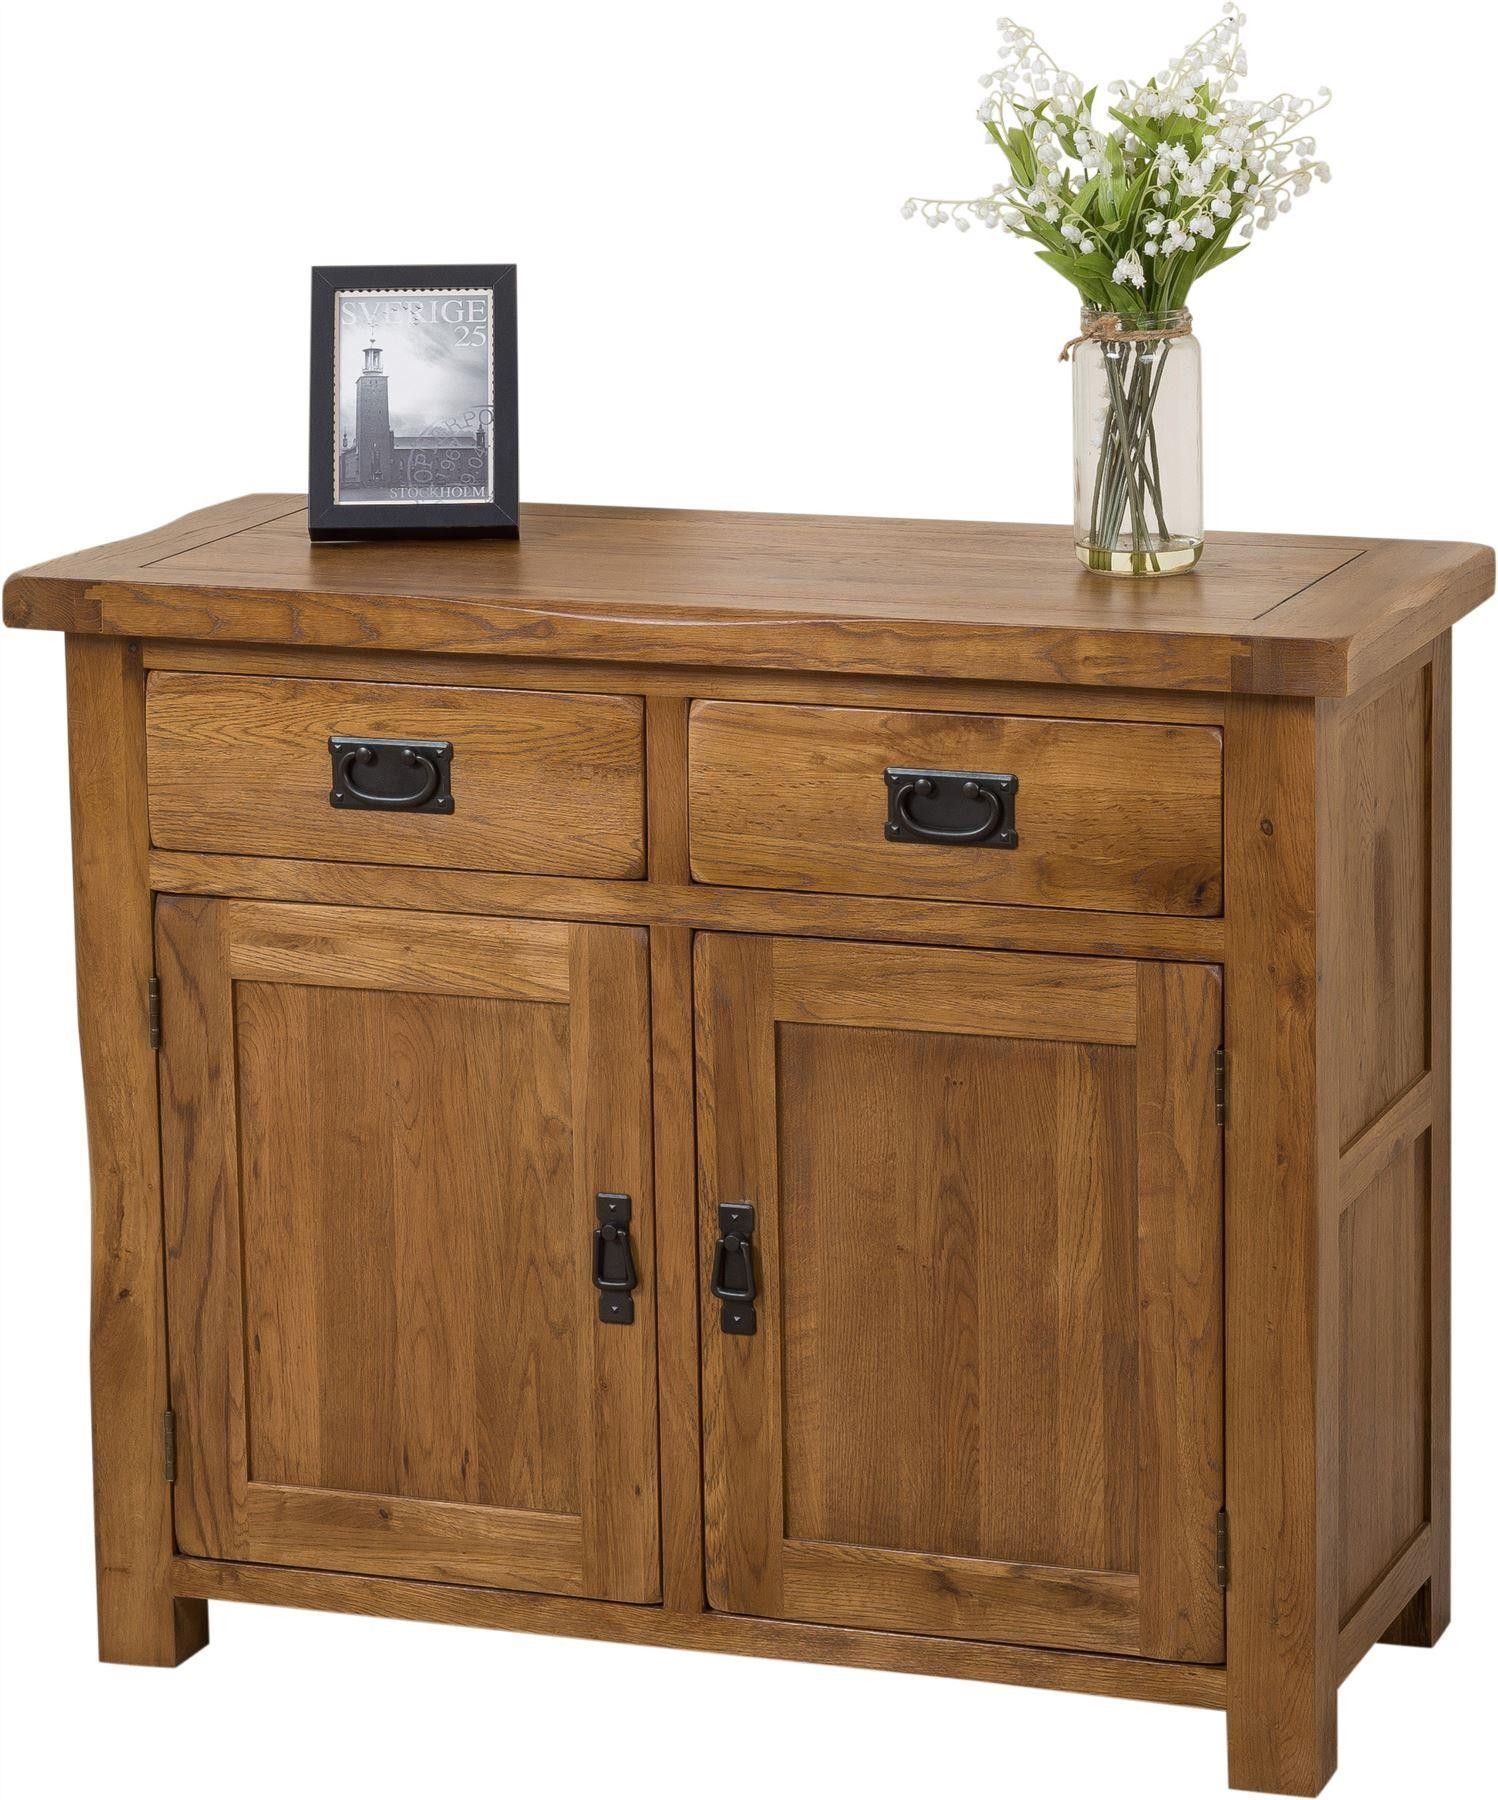 Cotswold Rustic Small Oak Sideboard | Modern Furniture Direct For Most Up To Date Rustic Oak Sideboards (View 7 of 15)